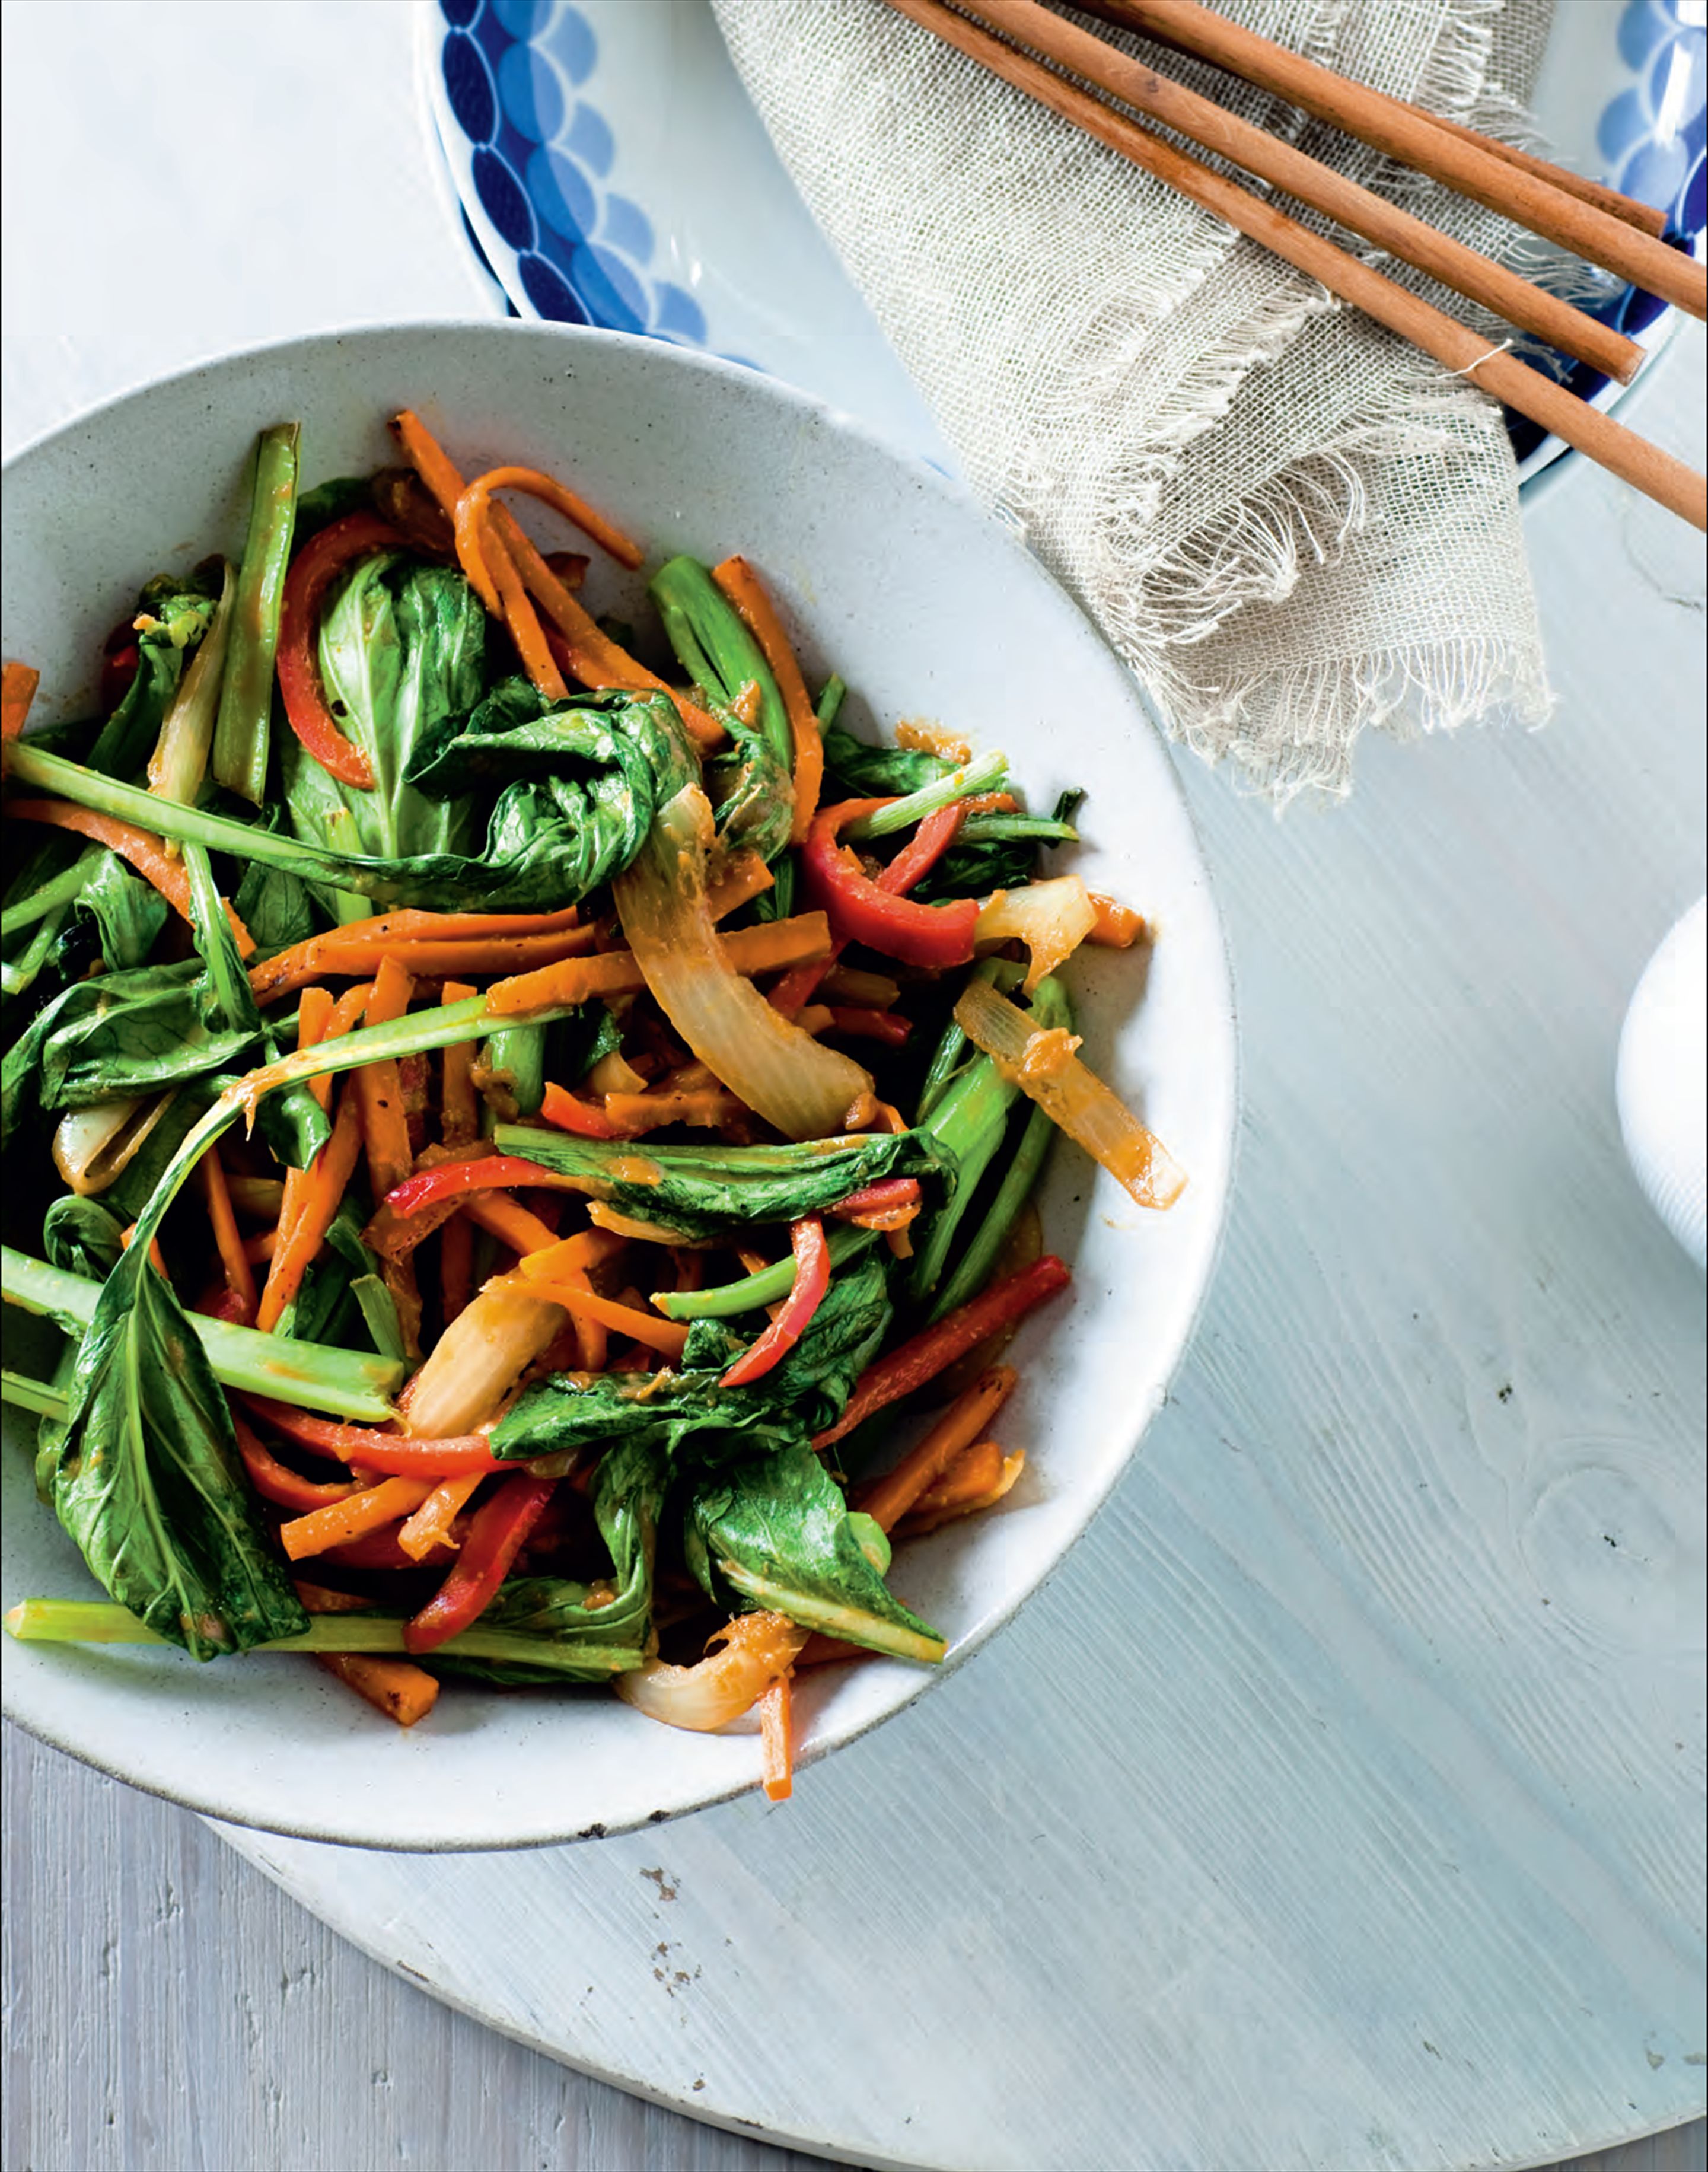 Vegetable stir-fry with miso